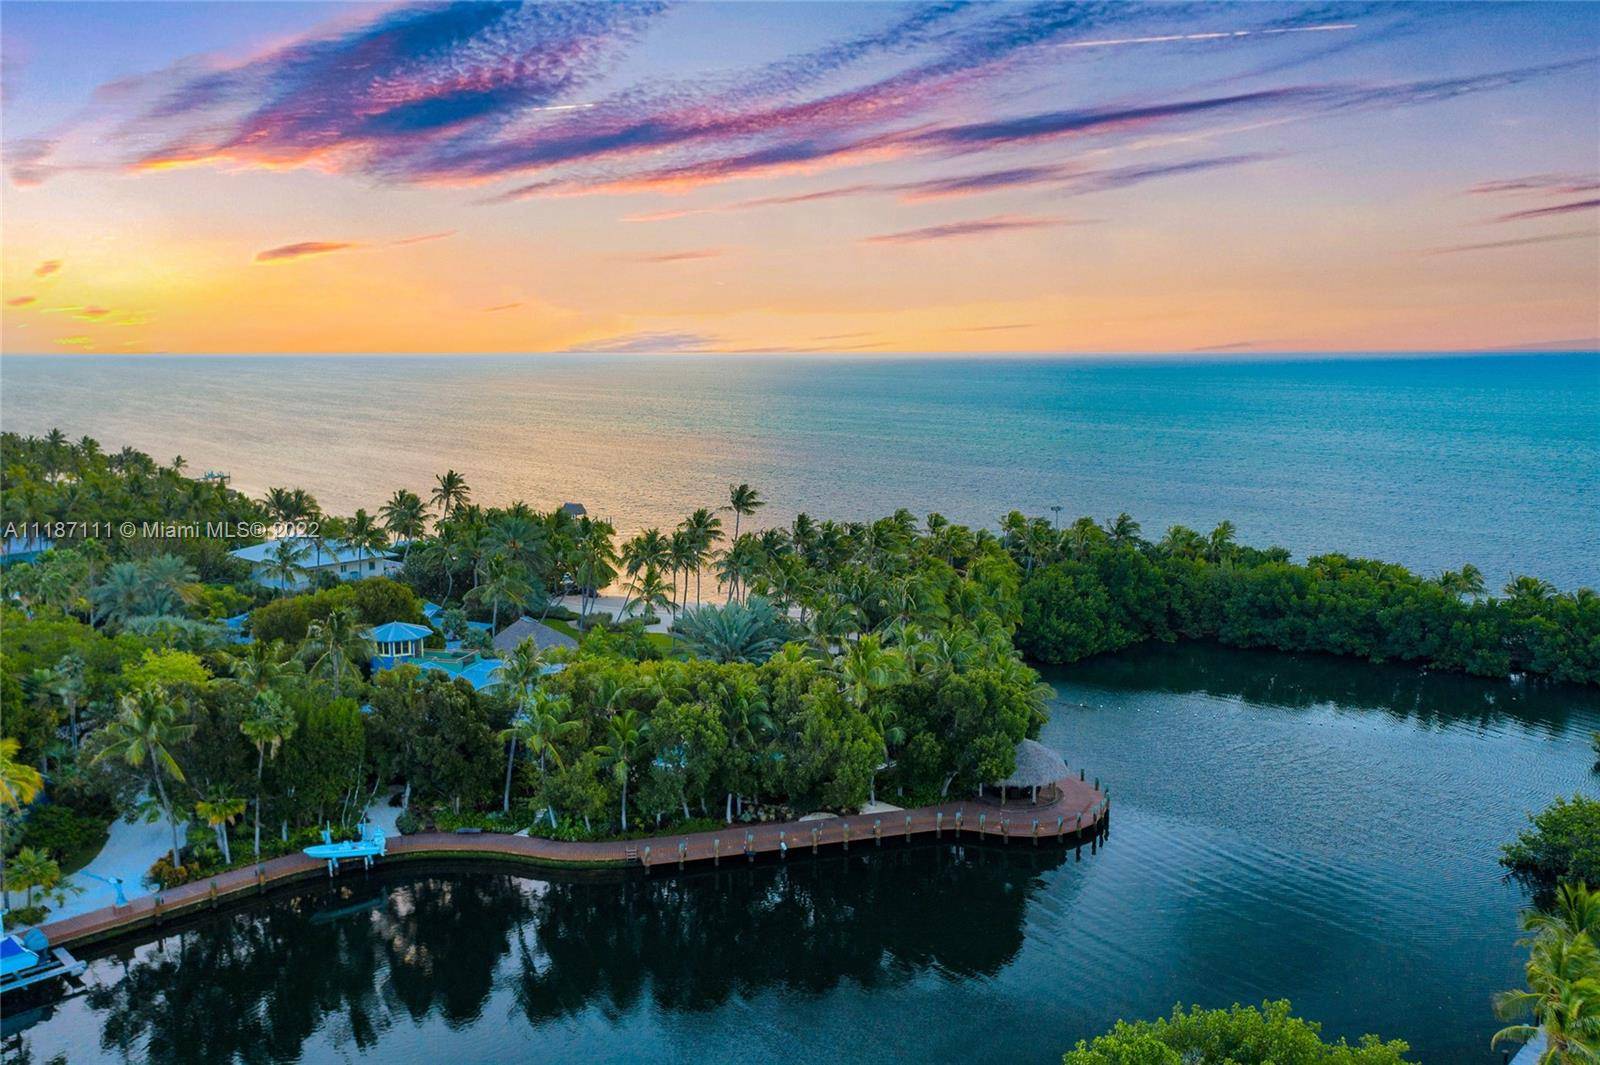 PALM HARBOR is one of the most exquisite and incomparable estates in all of the Florida Keys.